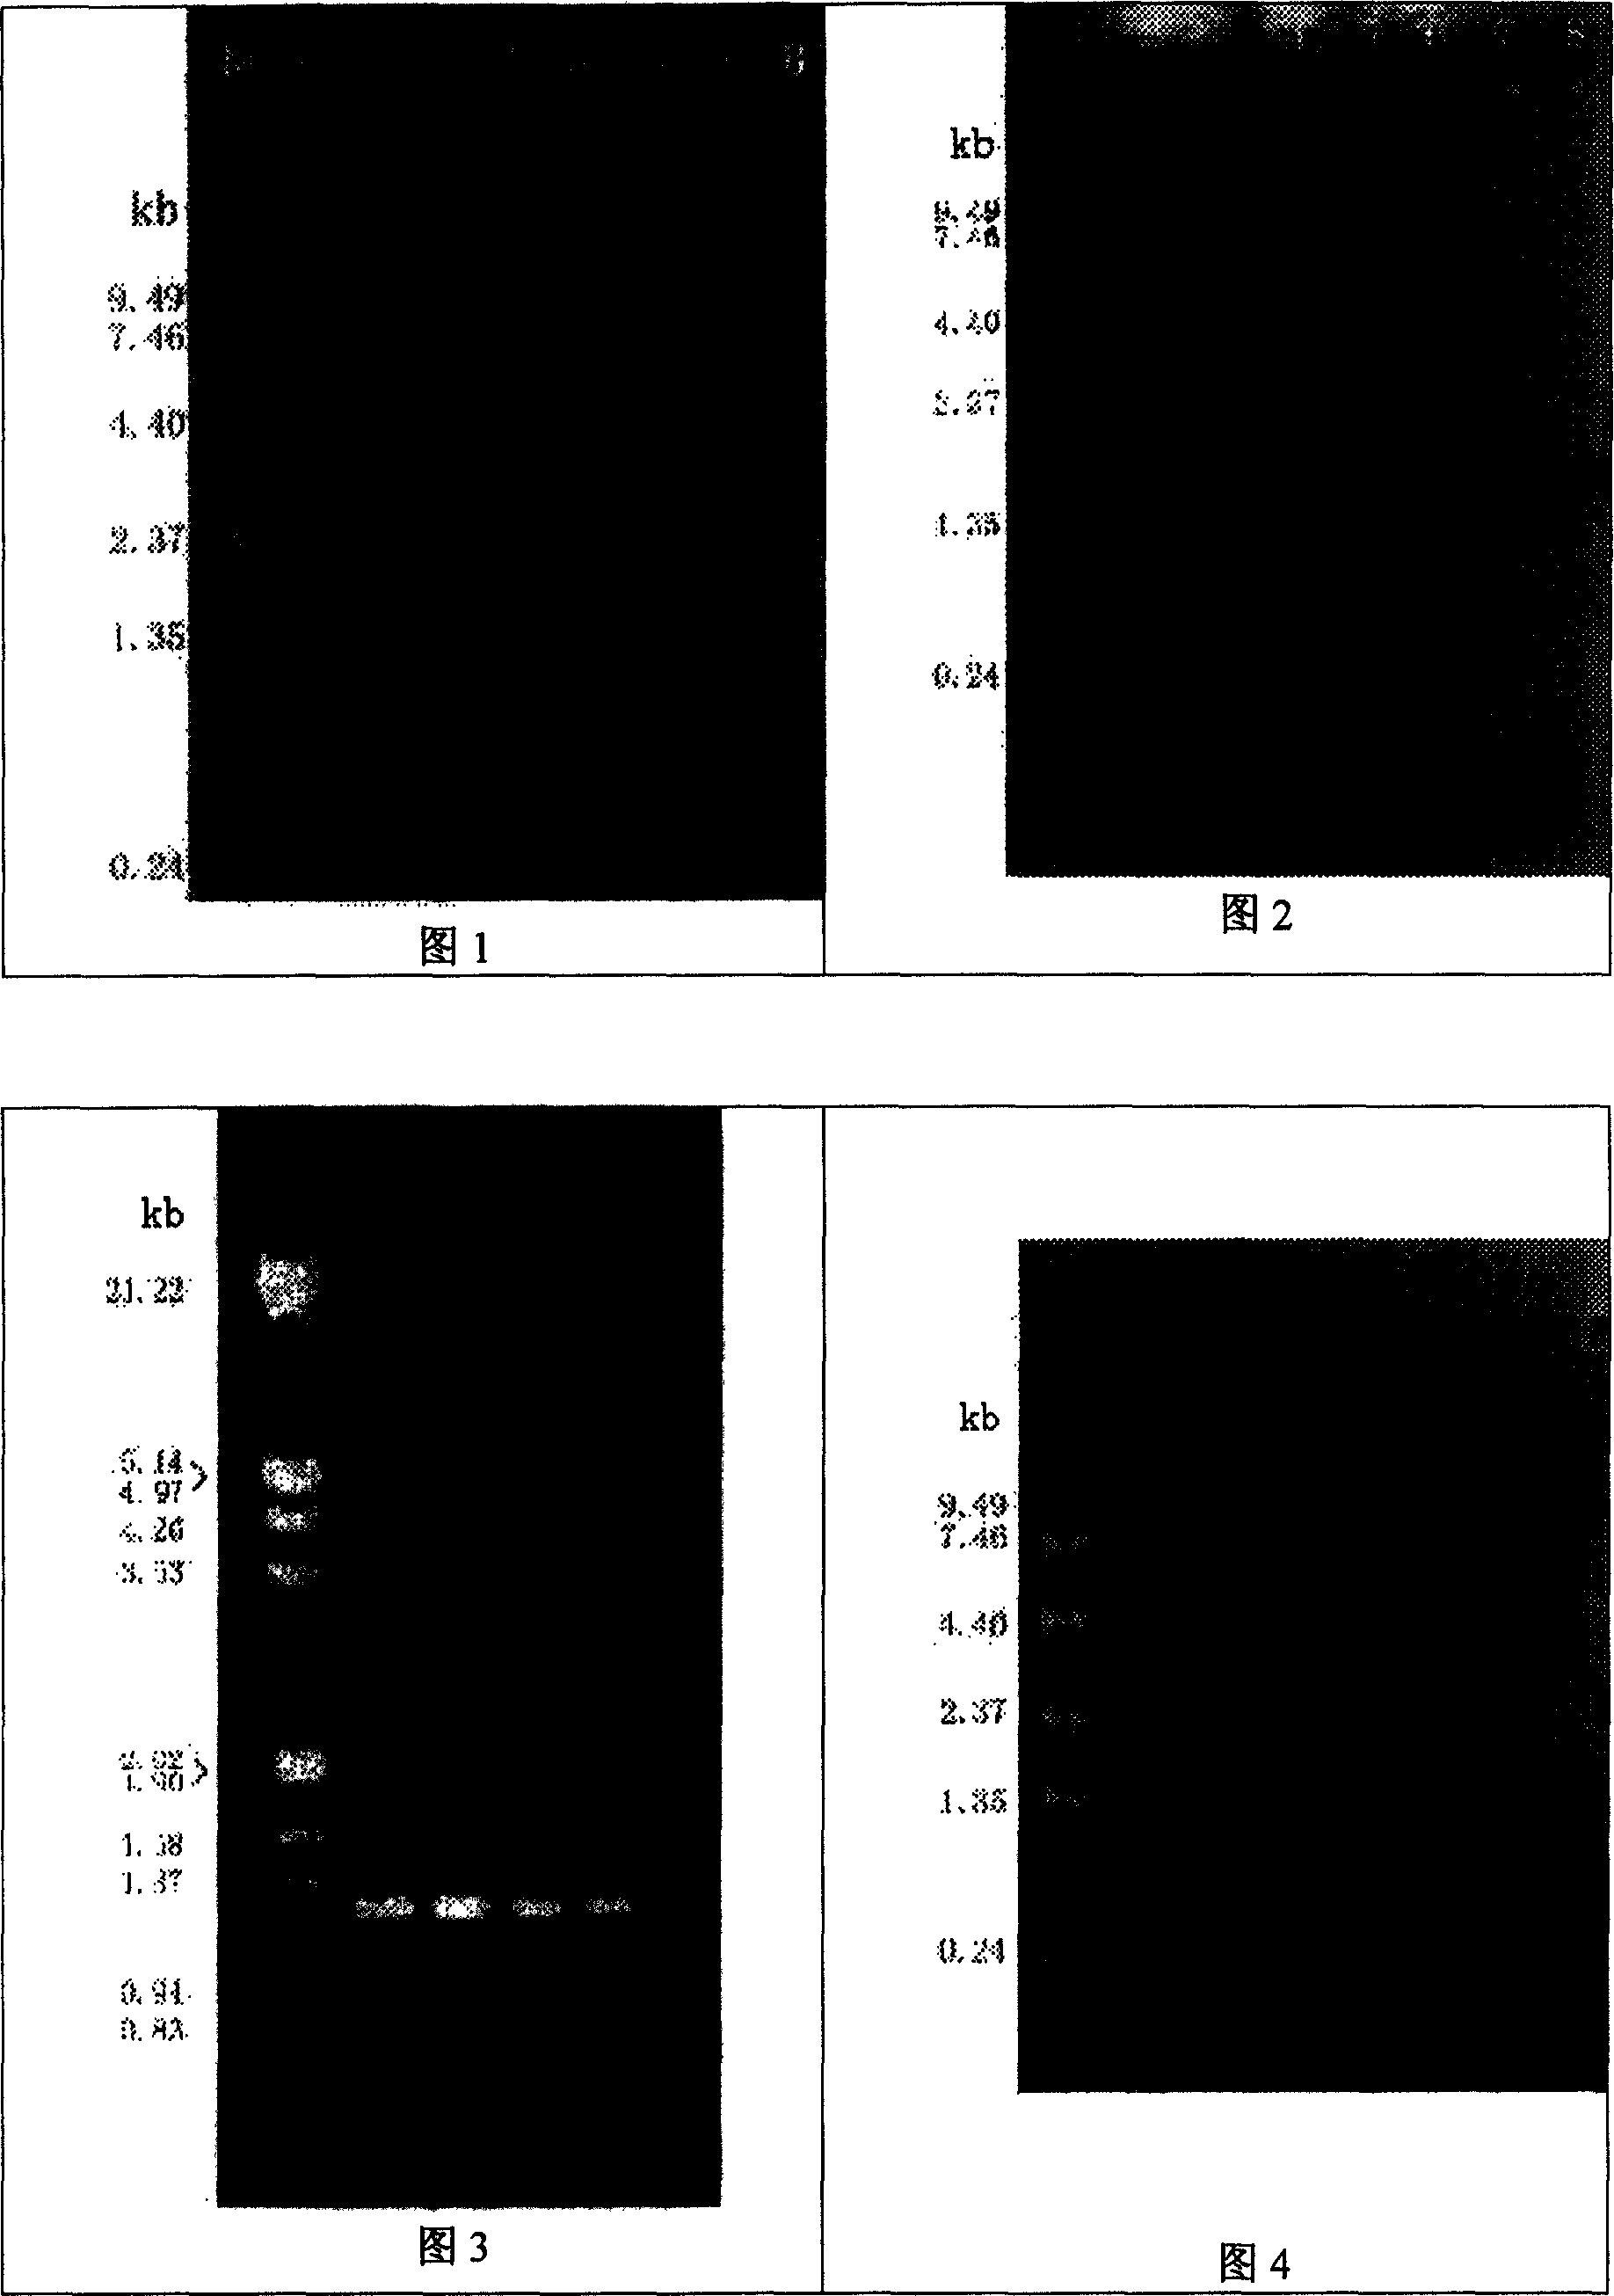 Method of separating whole length, complete messenger RNA from total RNA